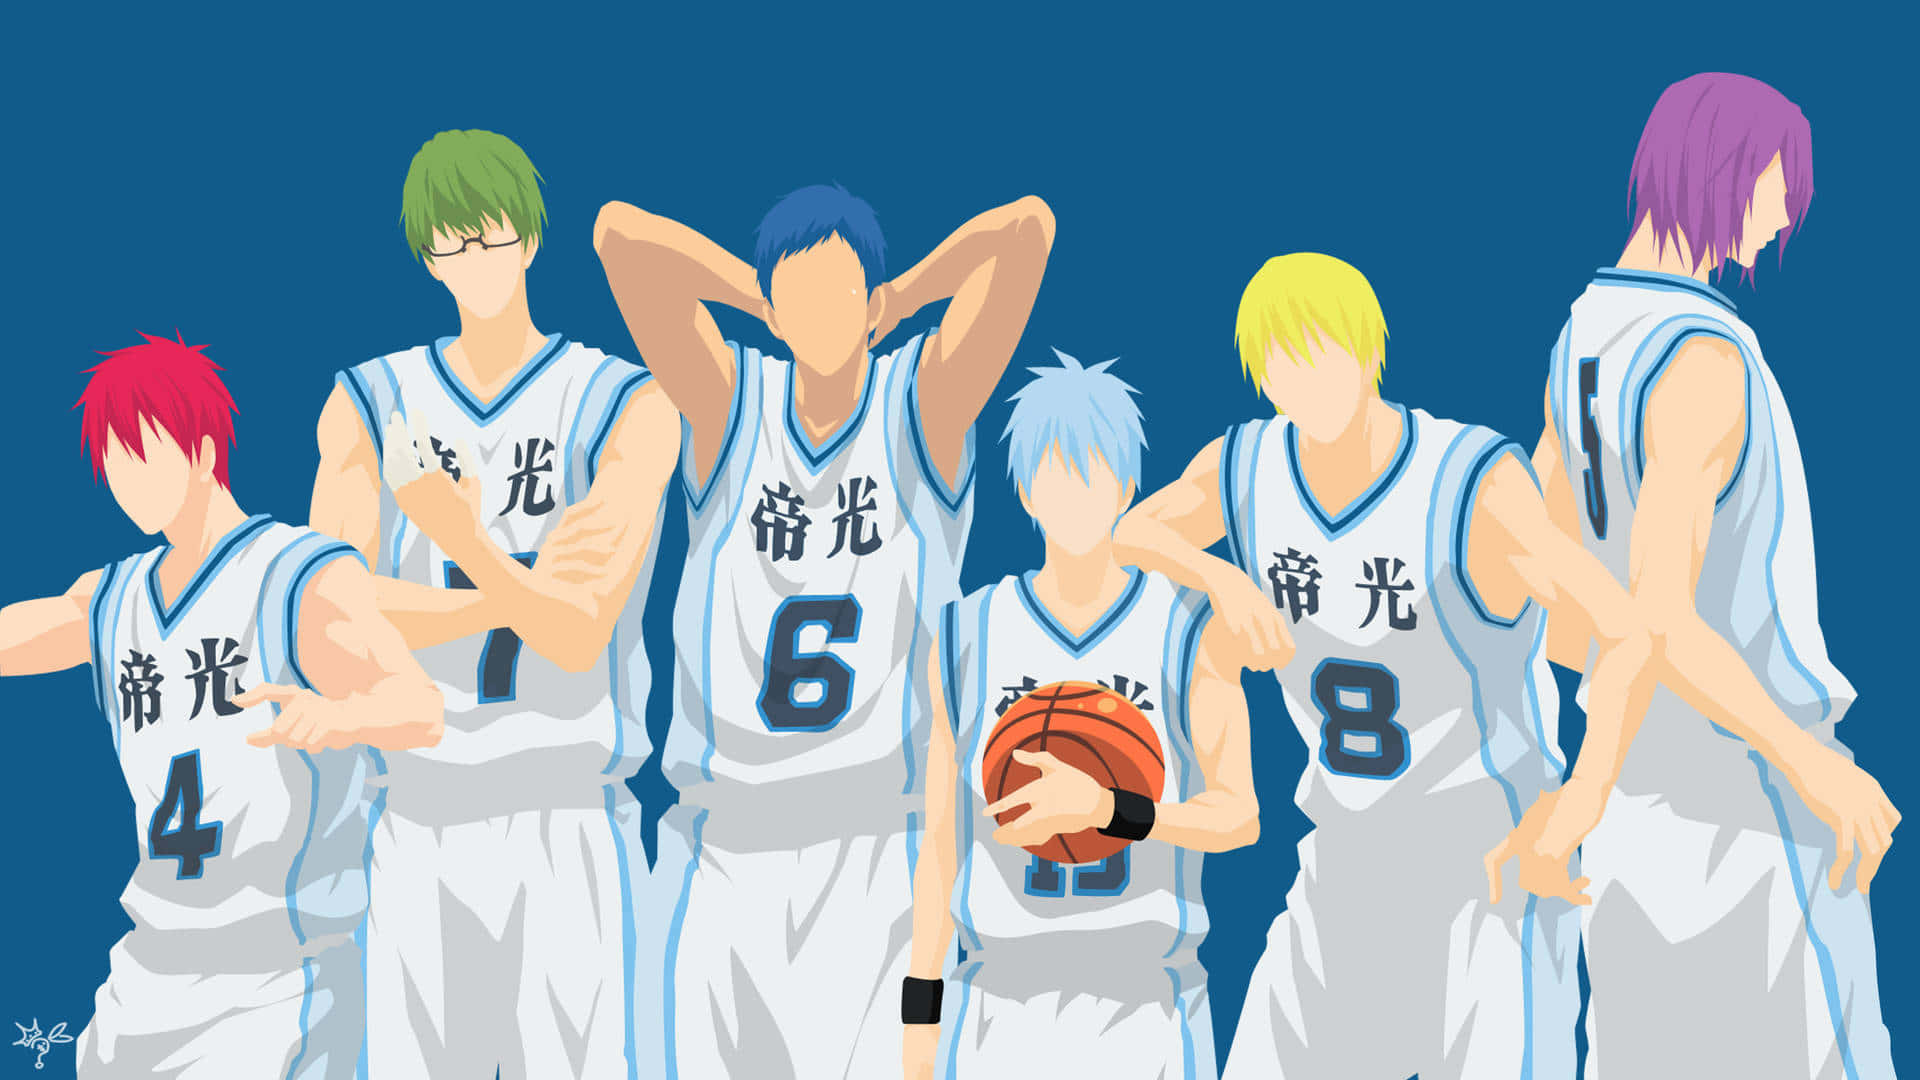 Kuroko, Kagami, and the Rest of the Teikō Basketball Team Prepare for a Game